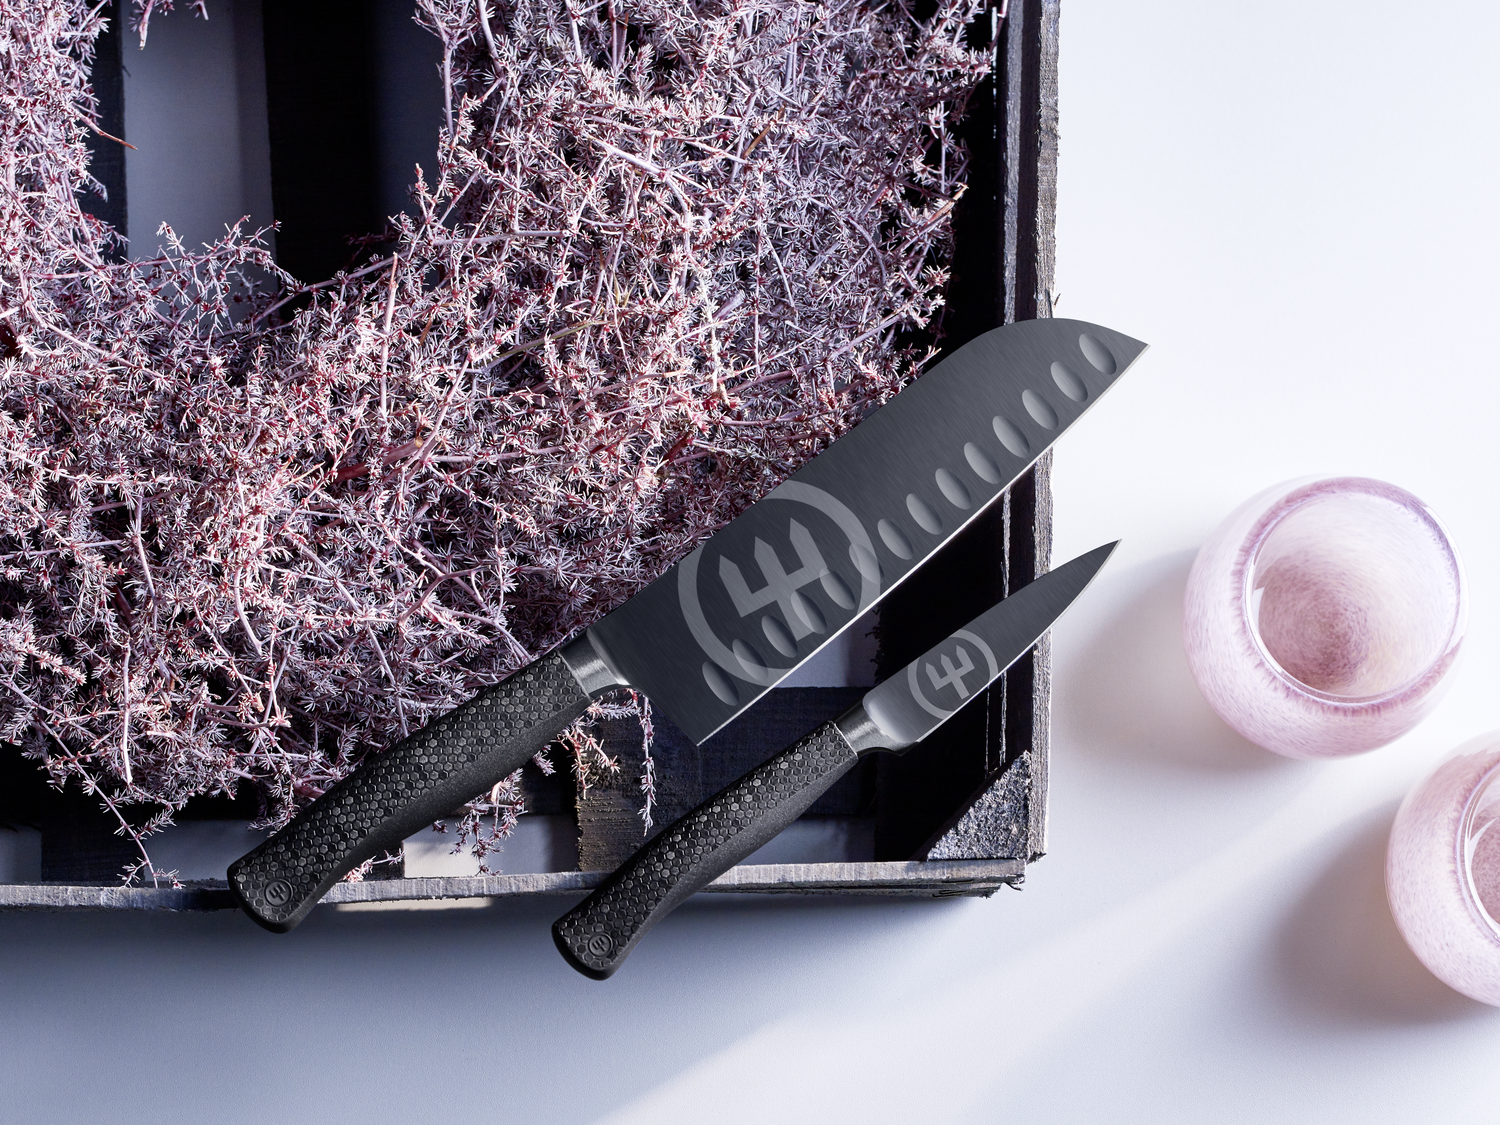 WÜSTHOF Performer Santoku and paring knives with purple wreath